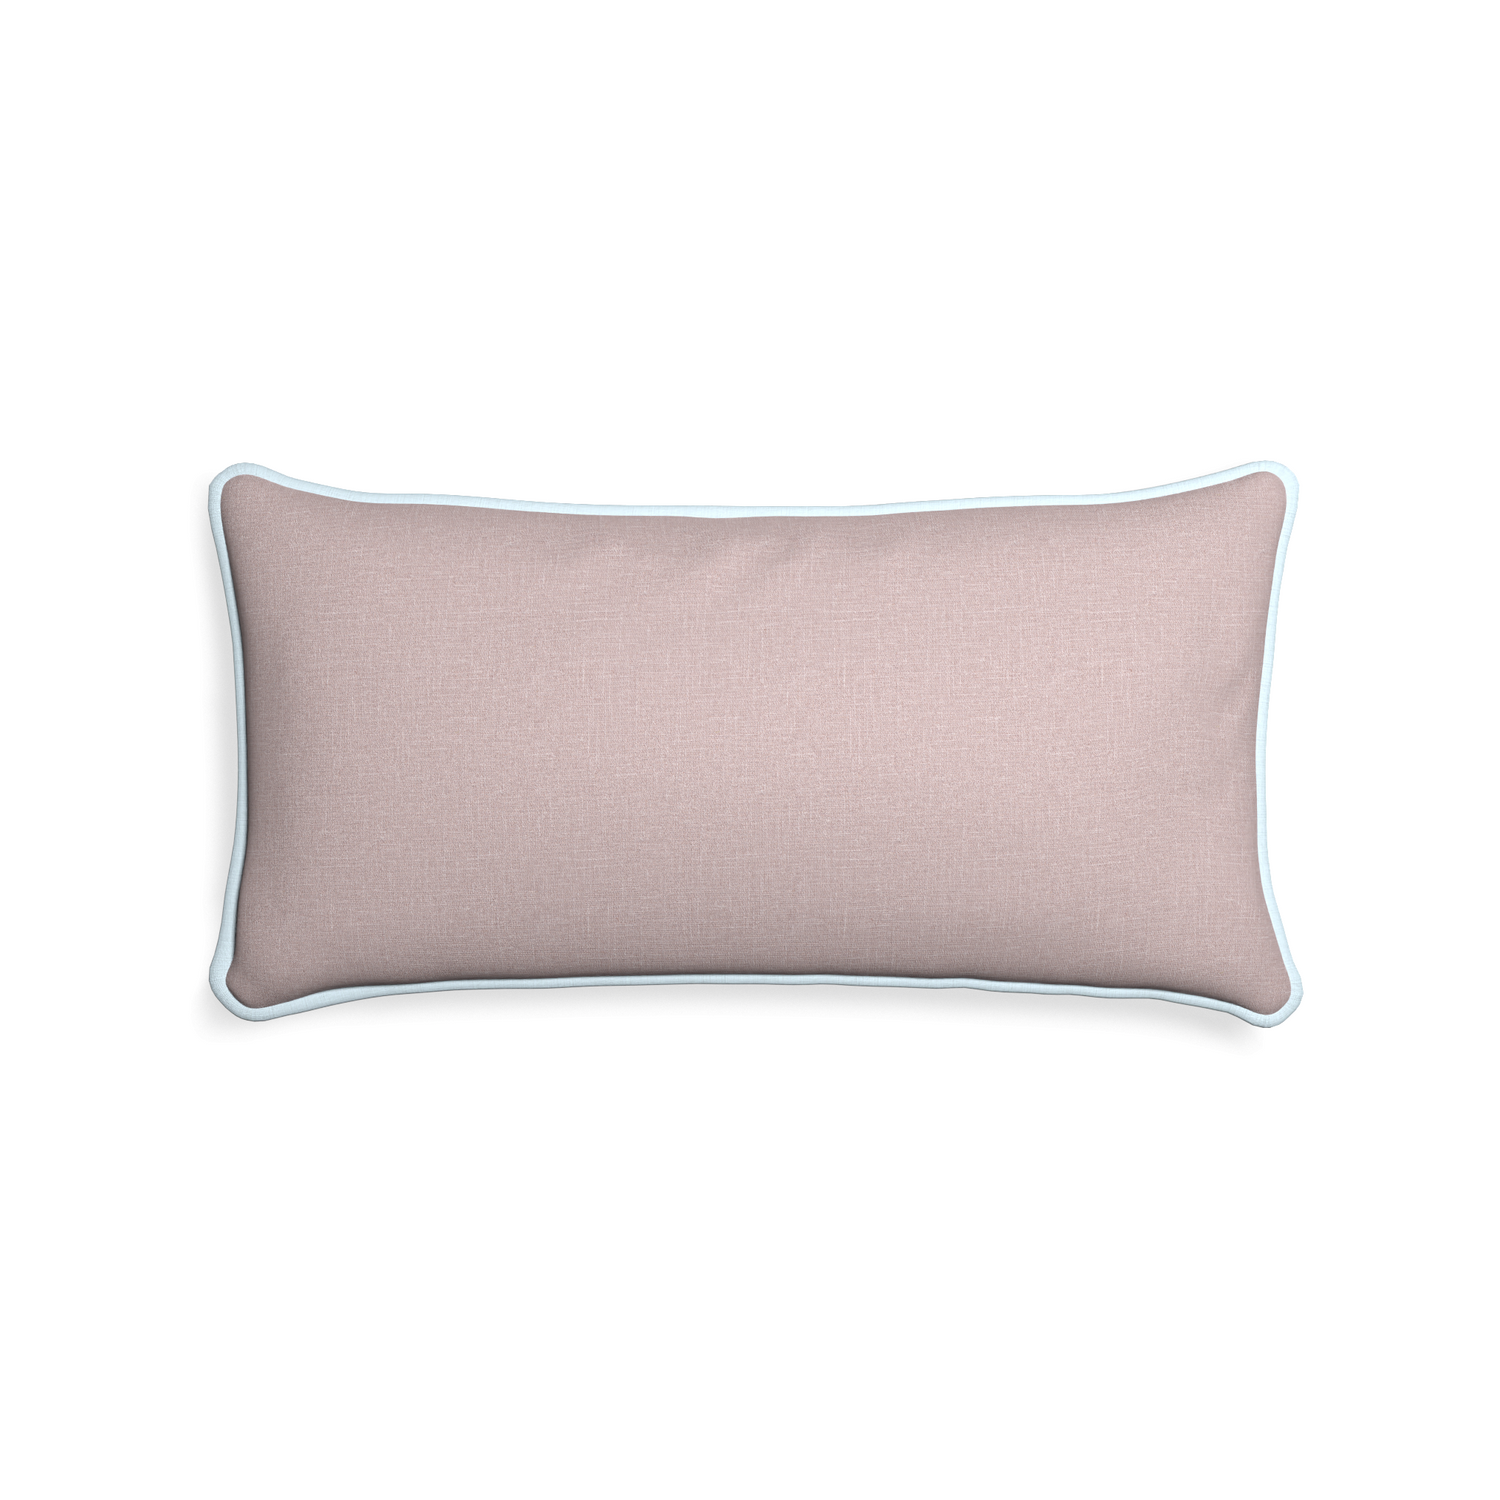 Midi-lumbar orchid custom mauve pinkpillow with powder piping on white background